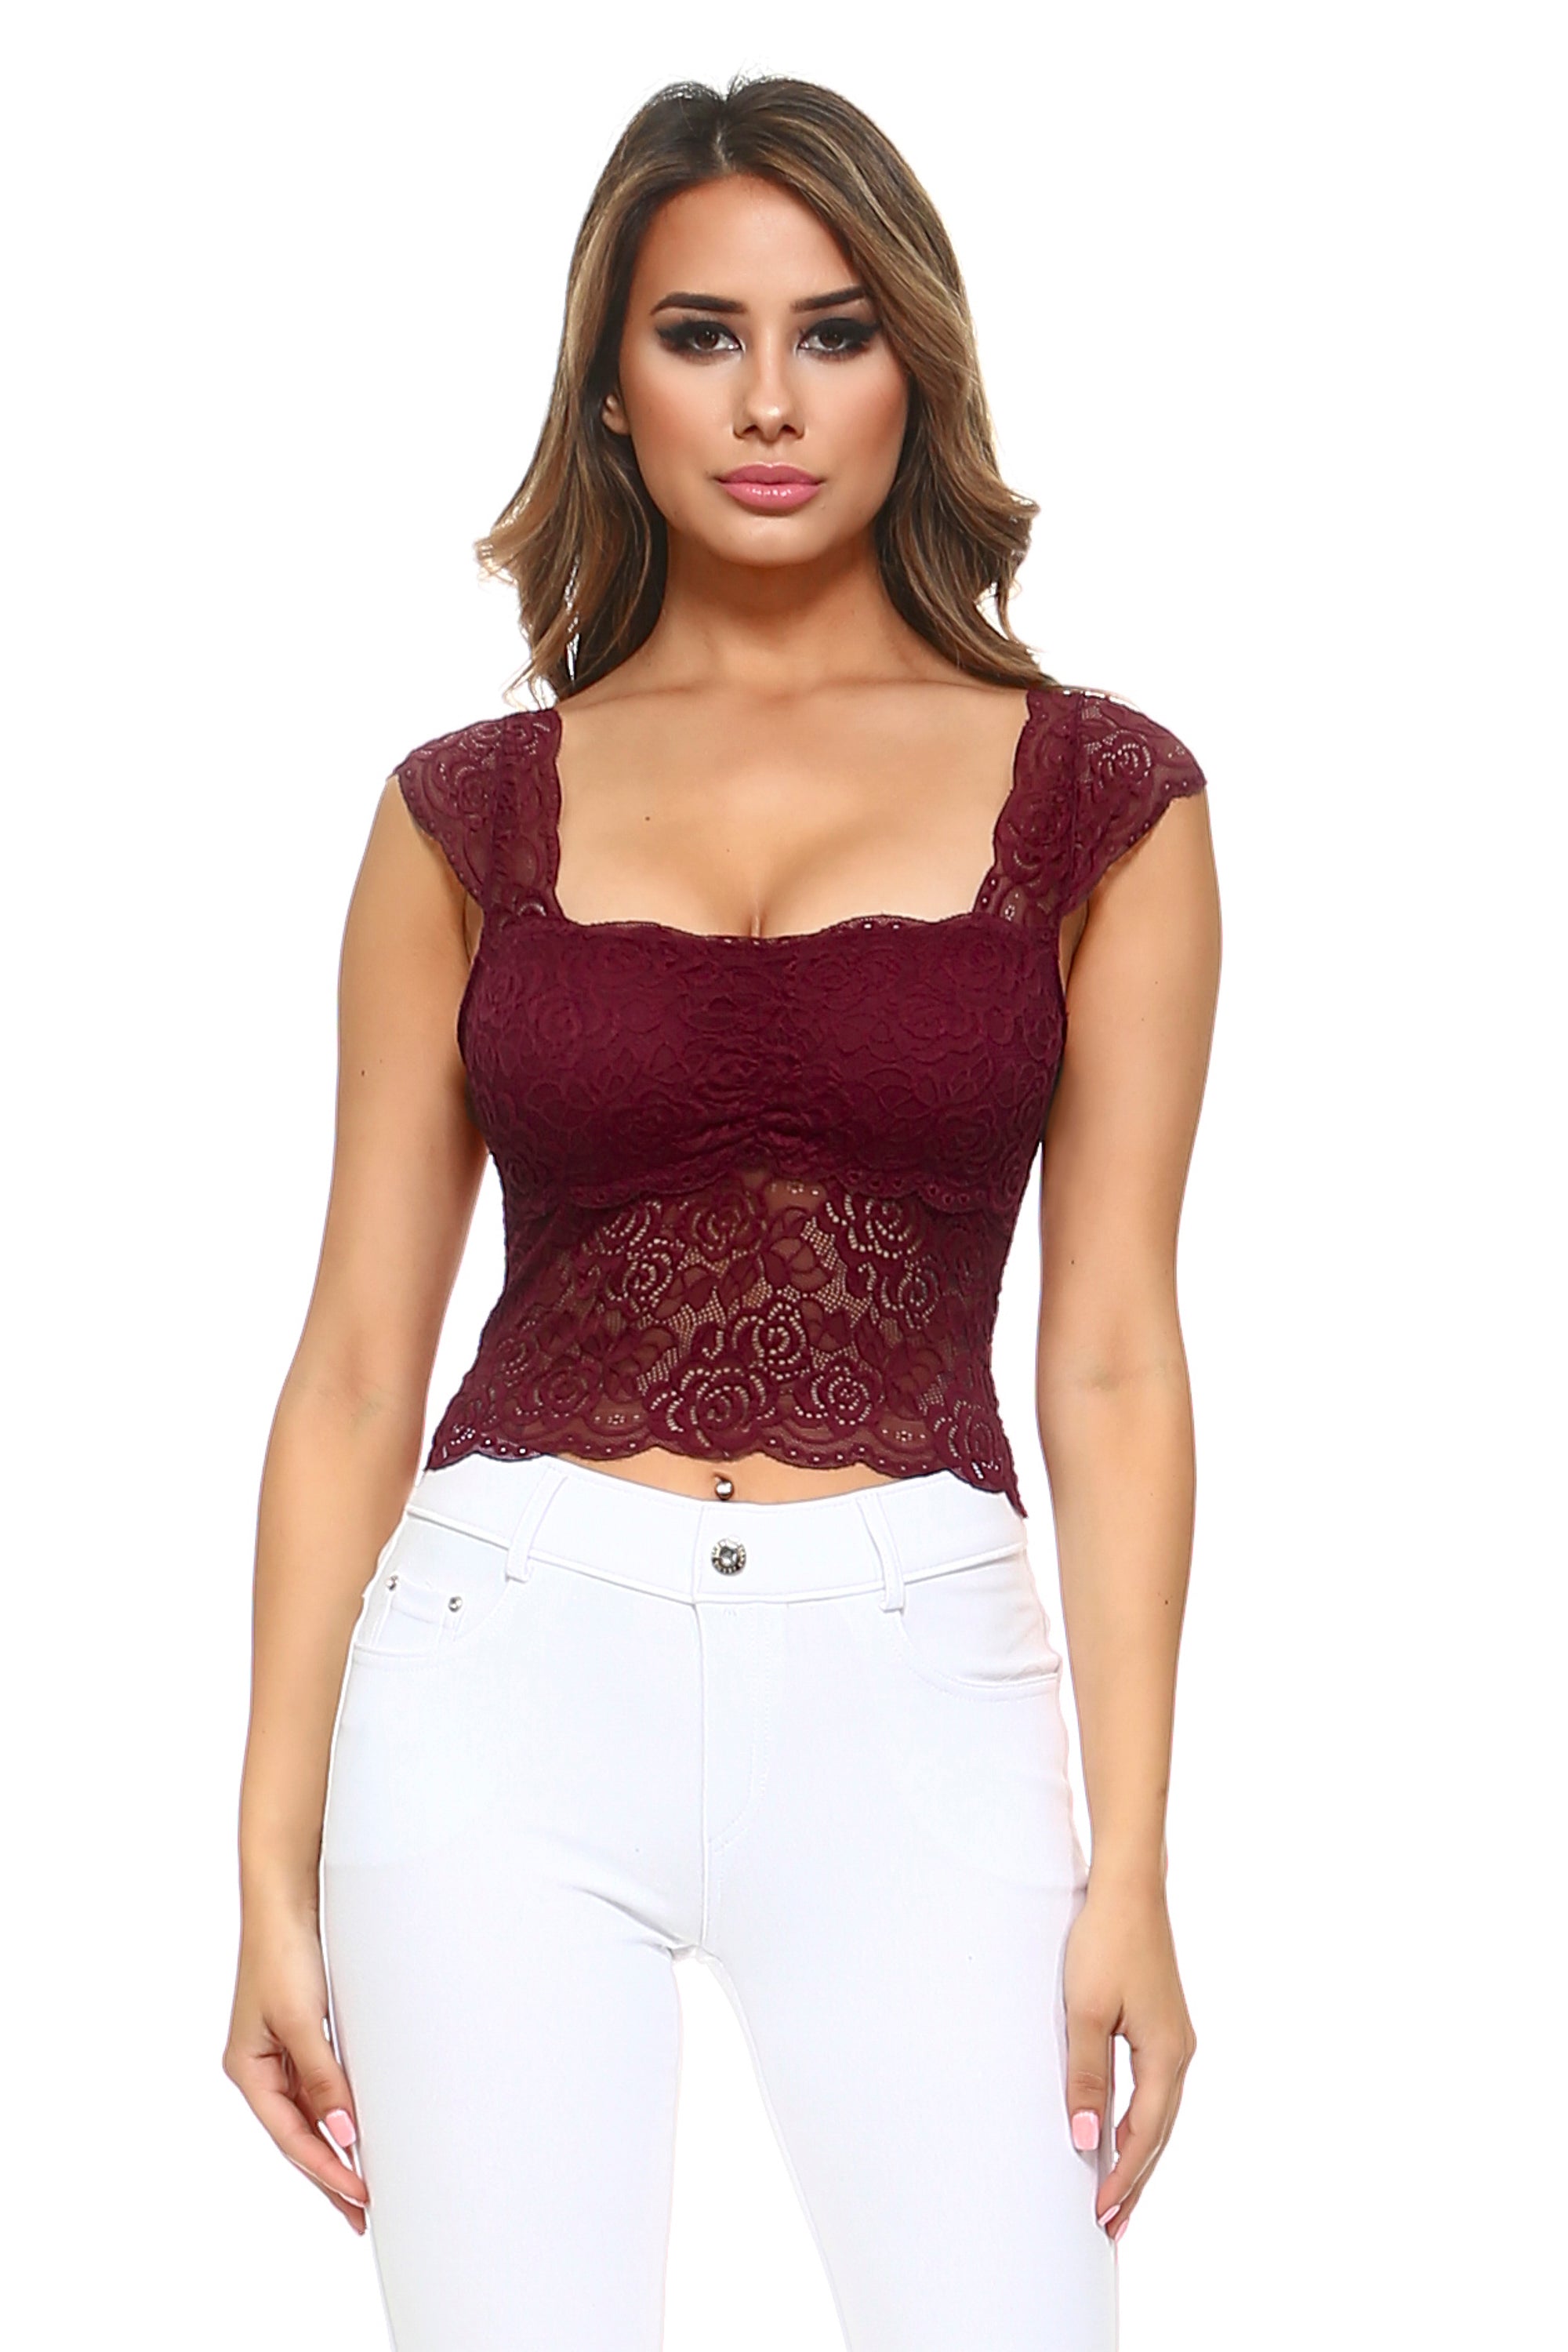 Damsel in Distress Lace Lingerie – ICONOFLASH